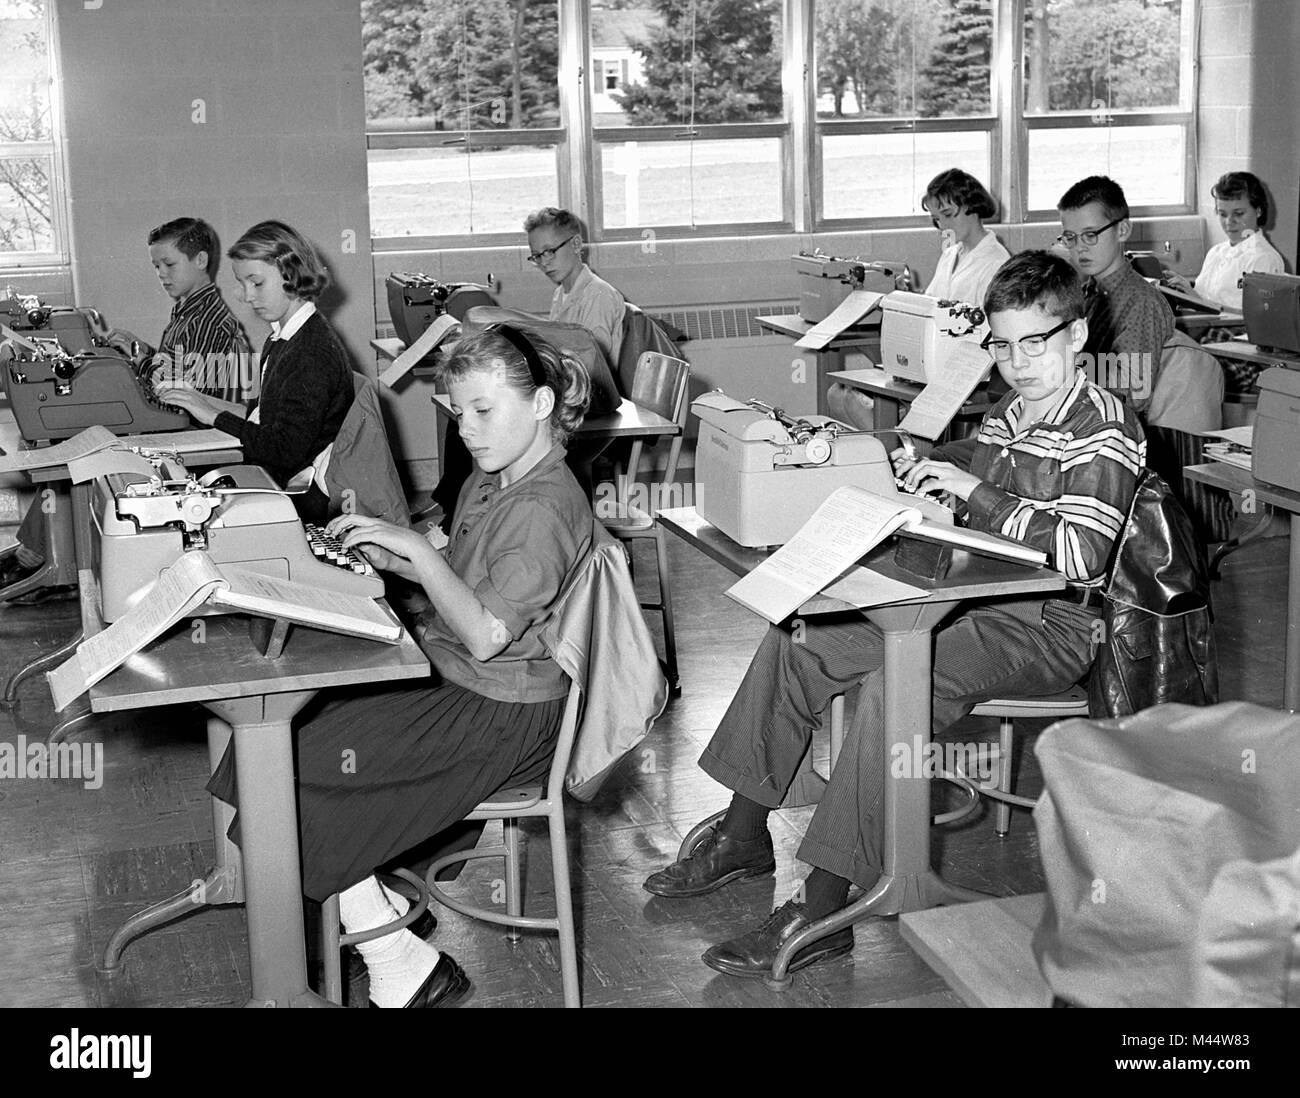 Seventh graders work on typing skills, ca. 1964. Stock Photo